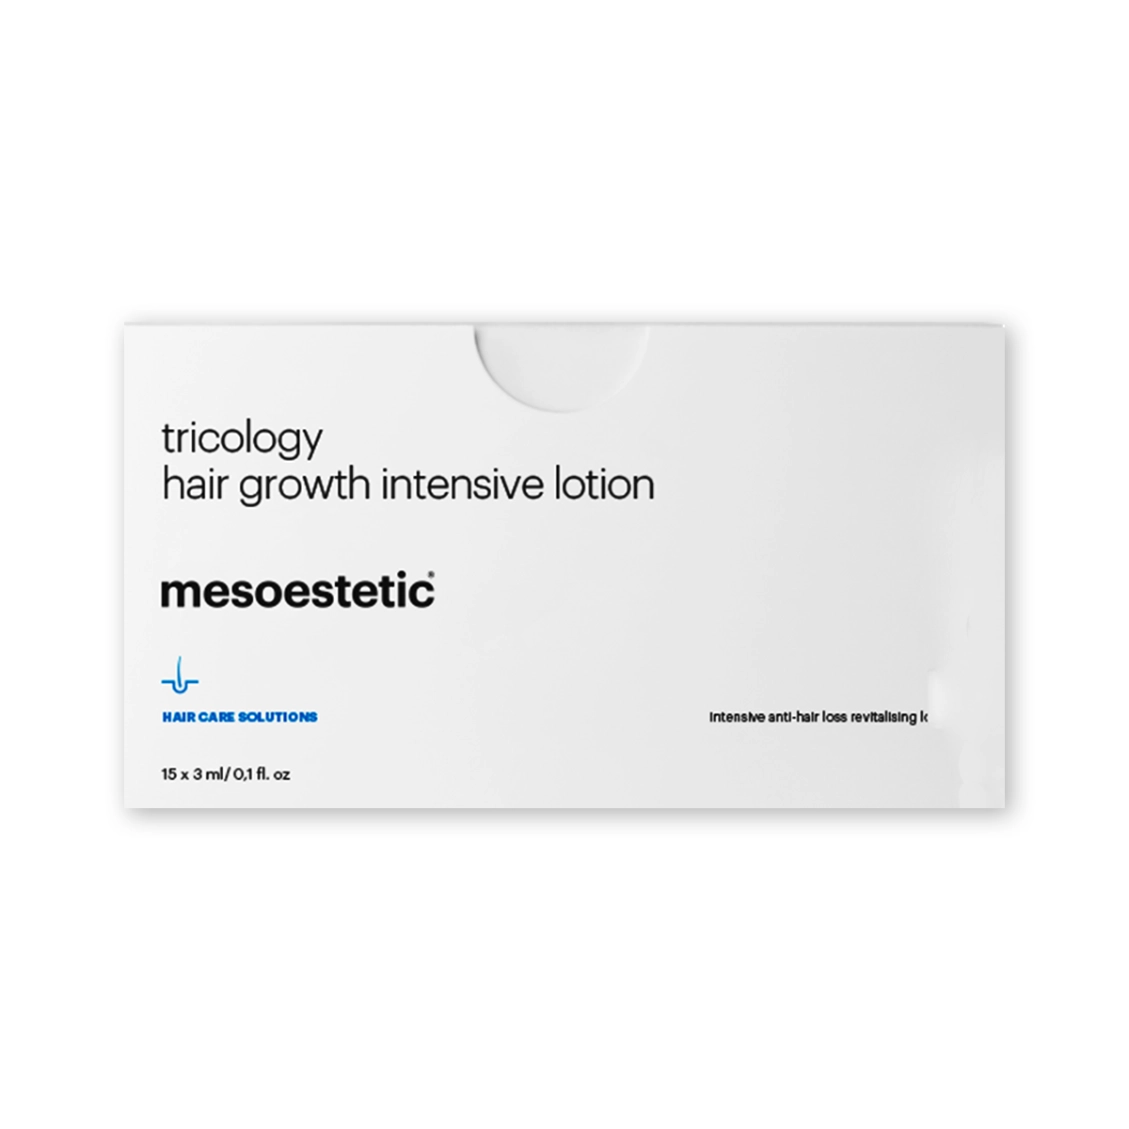 First product image of Mesoestetic Tricology Hair Growth Lotion (15x3ml)